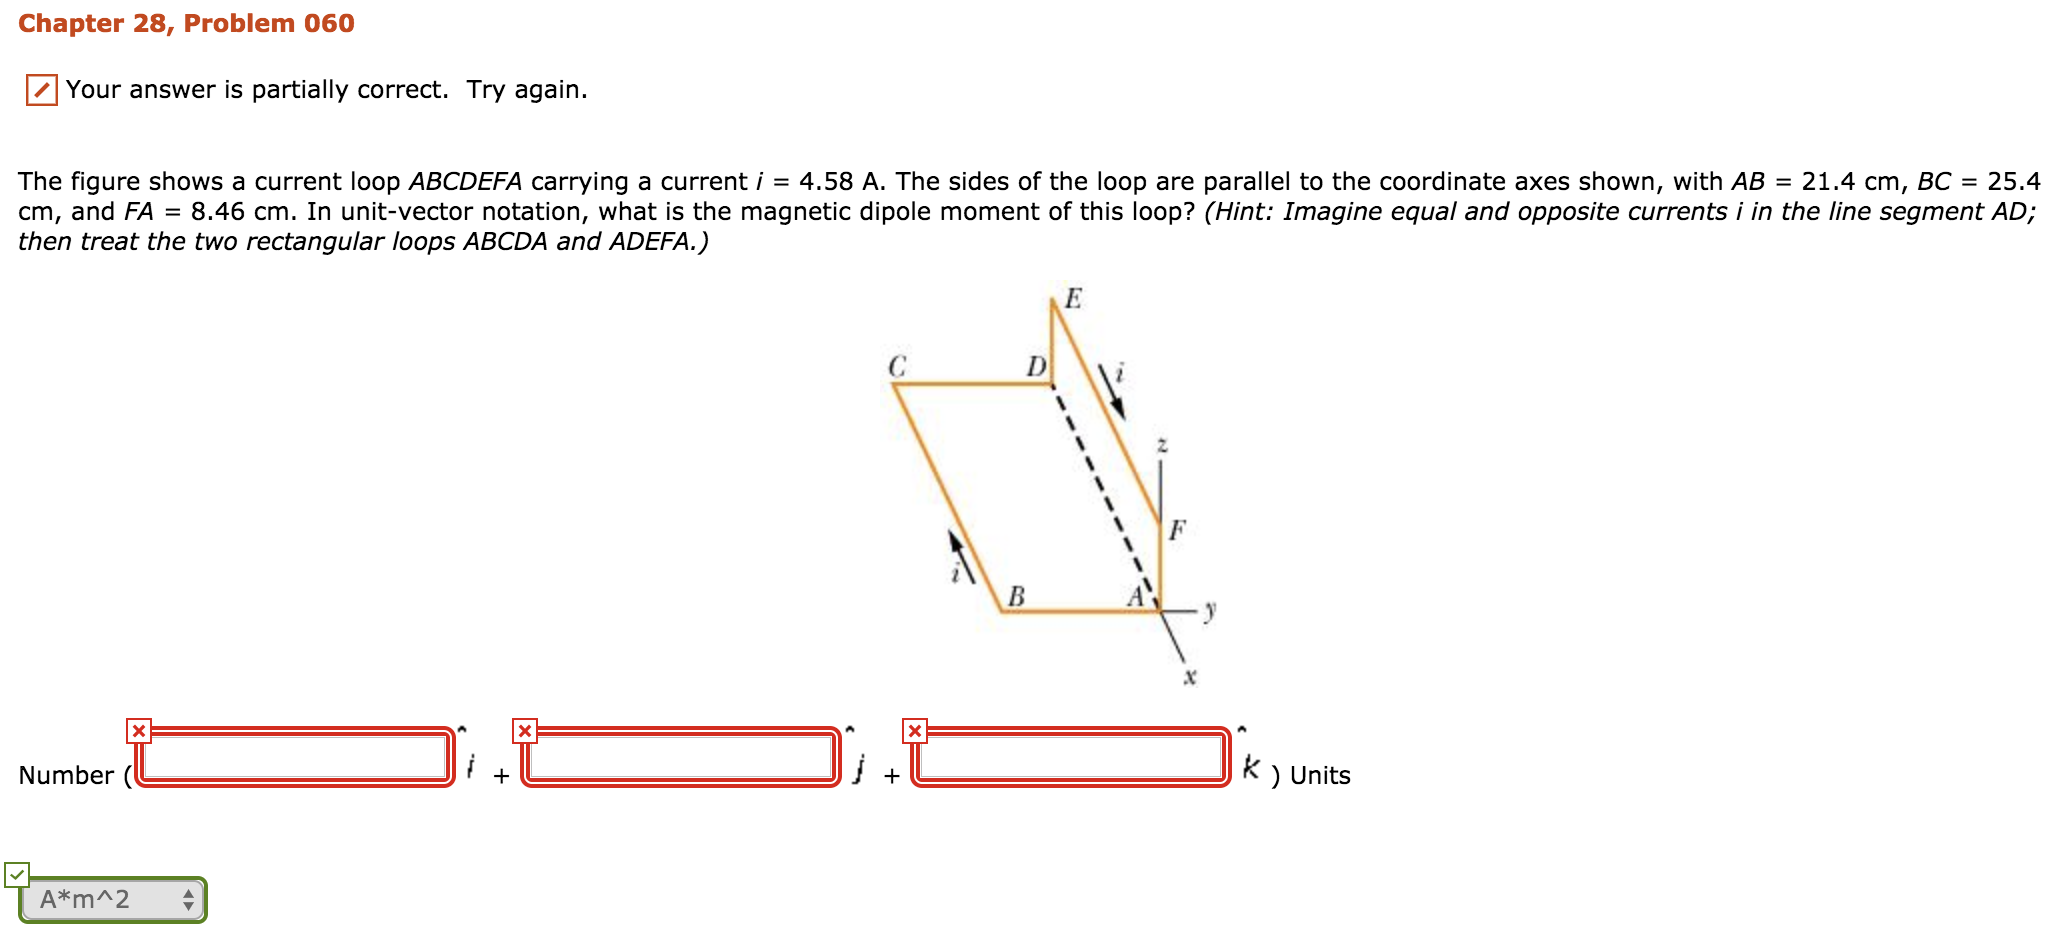 Chapter 28, Problem 060
Your answer is partially correct. Try again.
The figure shows a current loop ABCDEFA carrying a current i -4.58 A. The sides of the loop are parallel to the coordinate axes shown, with AB 21.4 cm, BC 25.4
cm, and FA = 8.46 cm. In unit-vector notation, what is the magnetic dipole moment of this loop? (Hint: Imagine equal and opposite currents i in the, line segment AD
then treat the two rectangular loops ABCDA and ADEFA.)
.0
k ) Units
Number (
